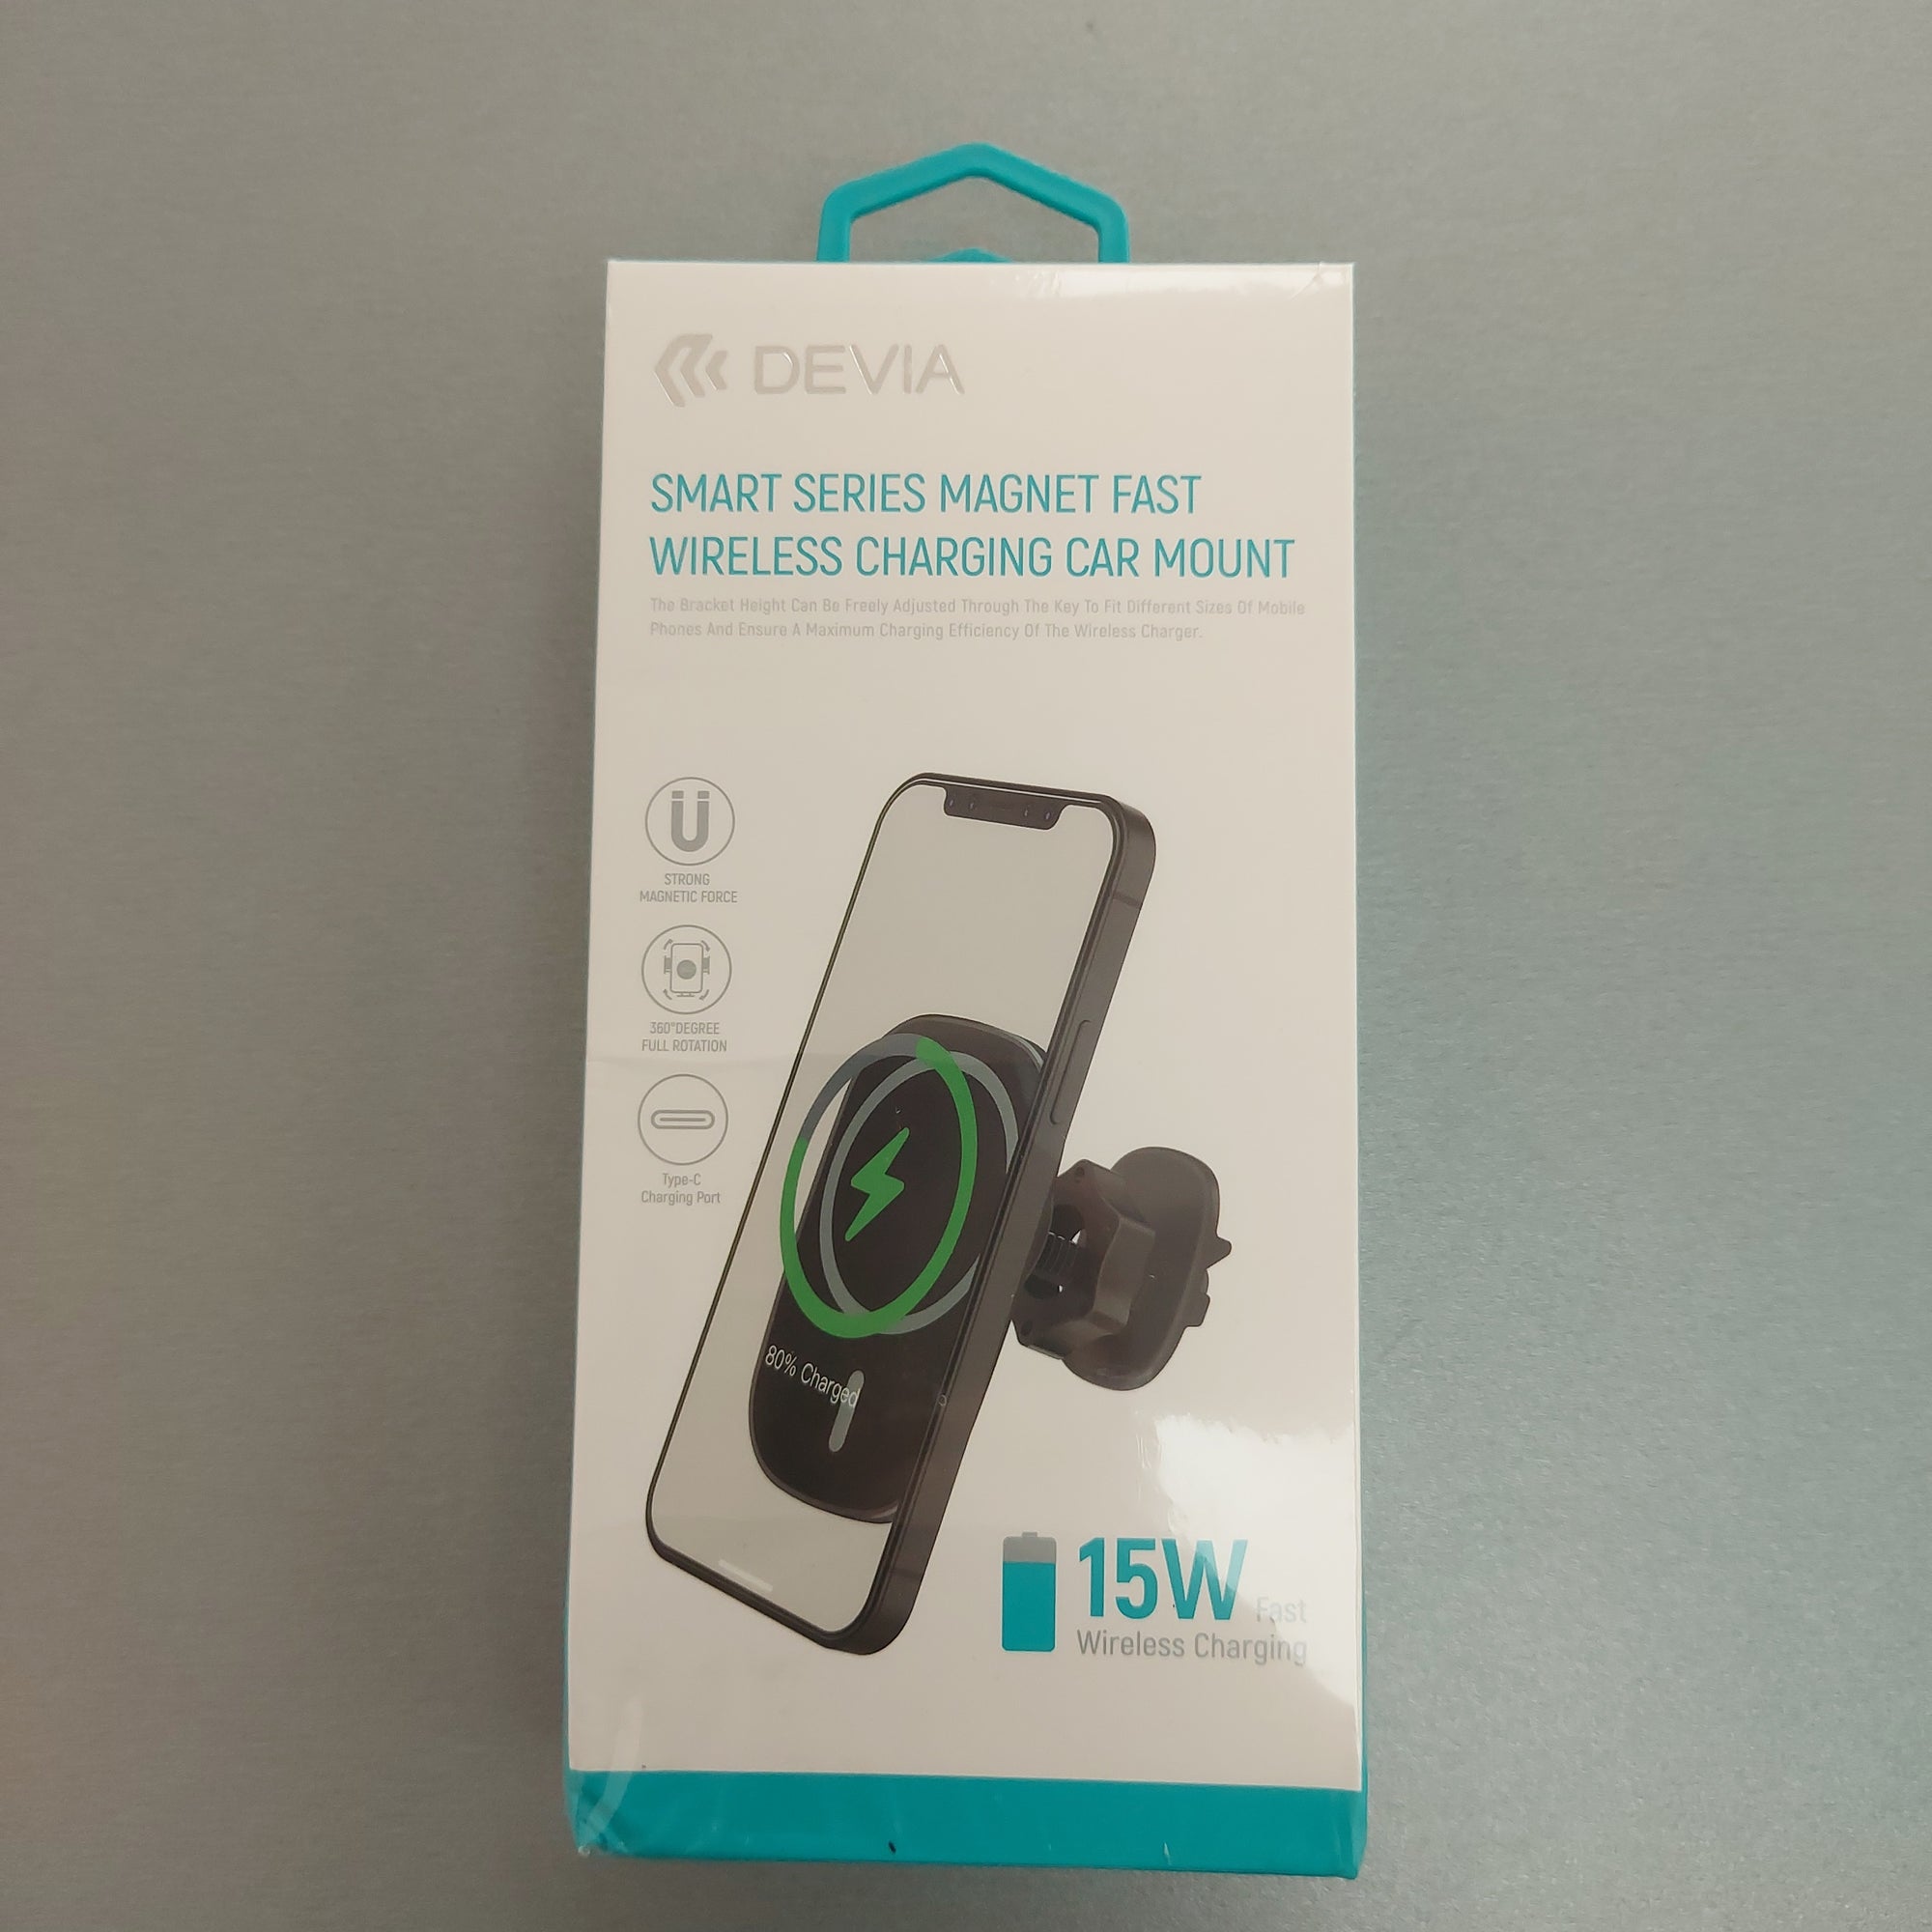 Devia Smart Series Magnet Fast Wireless Charging Car Mount